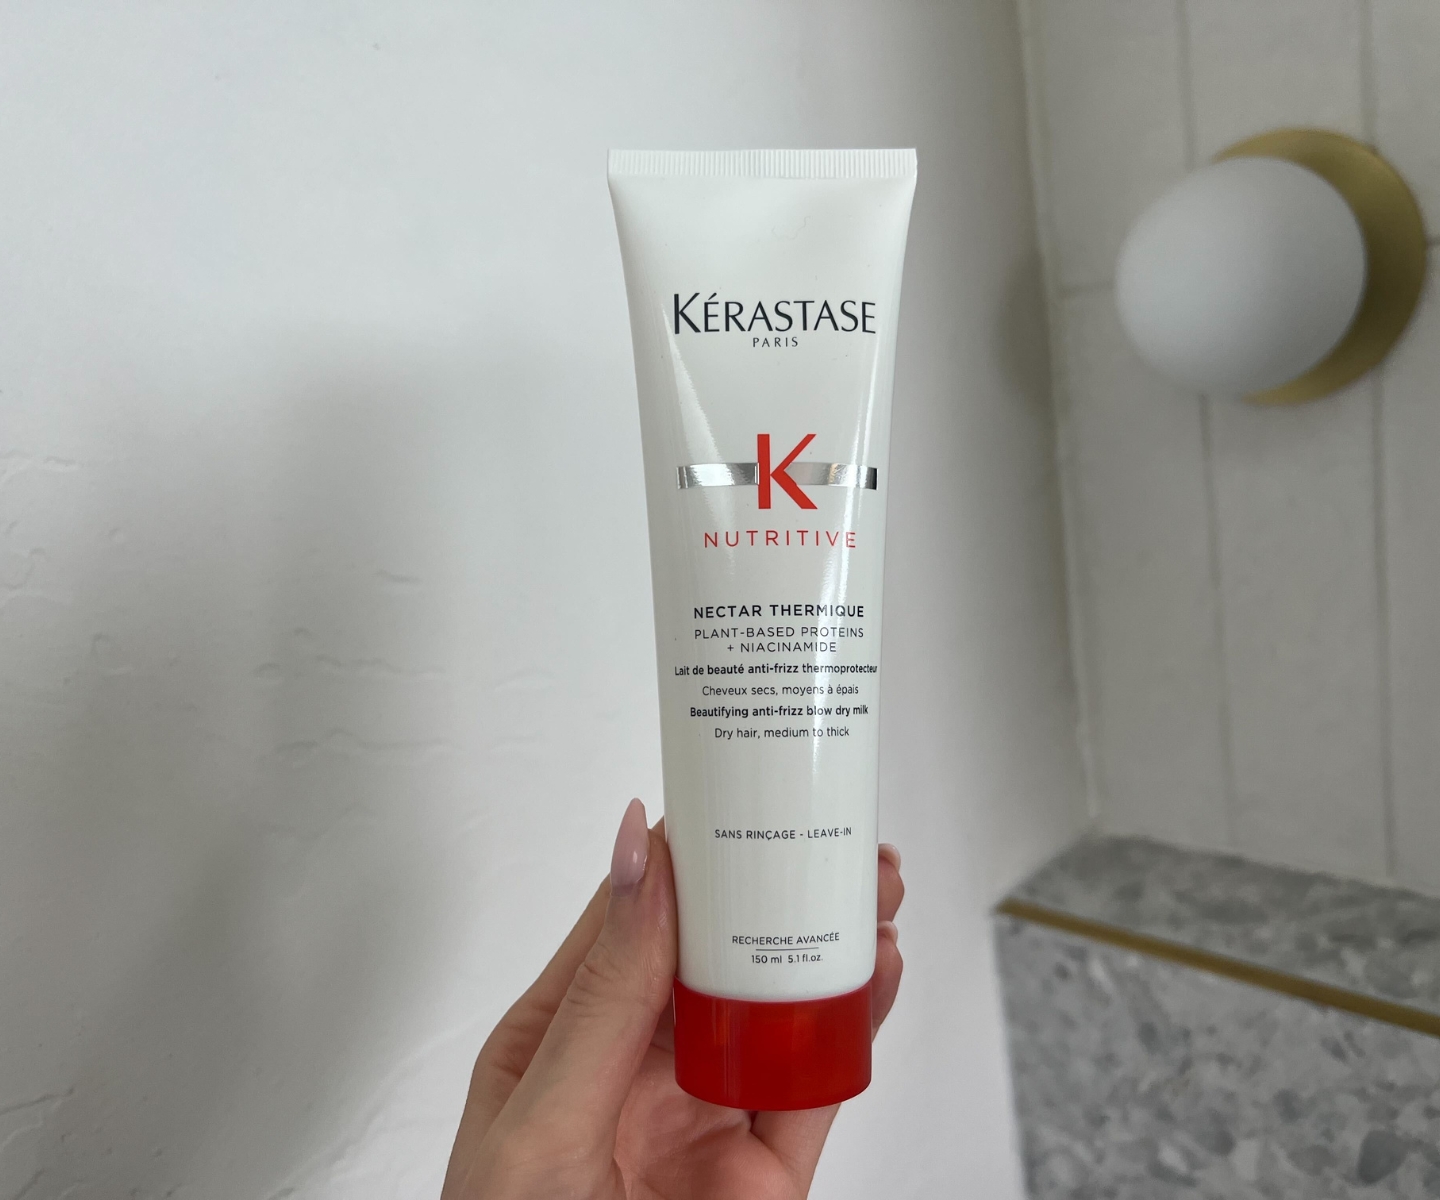 Kérastase Nutritive Nectar Thermique Blow-Dry Primer in-article